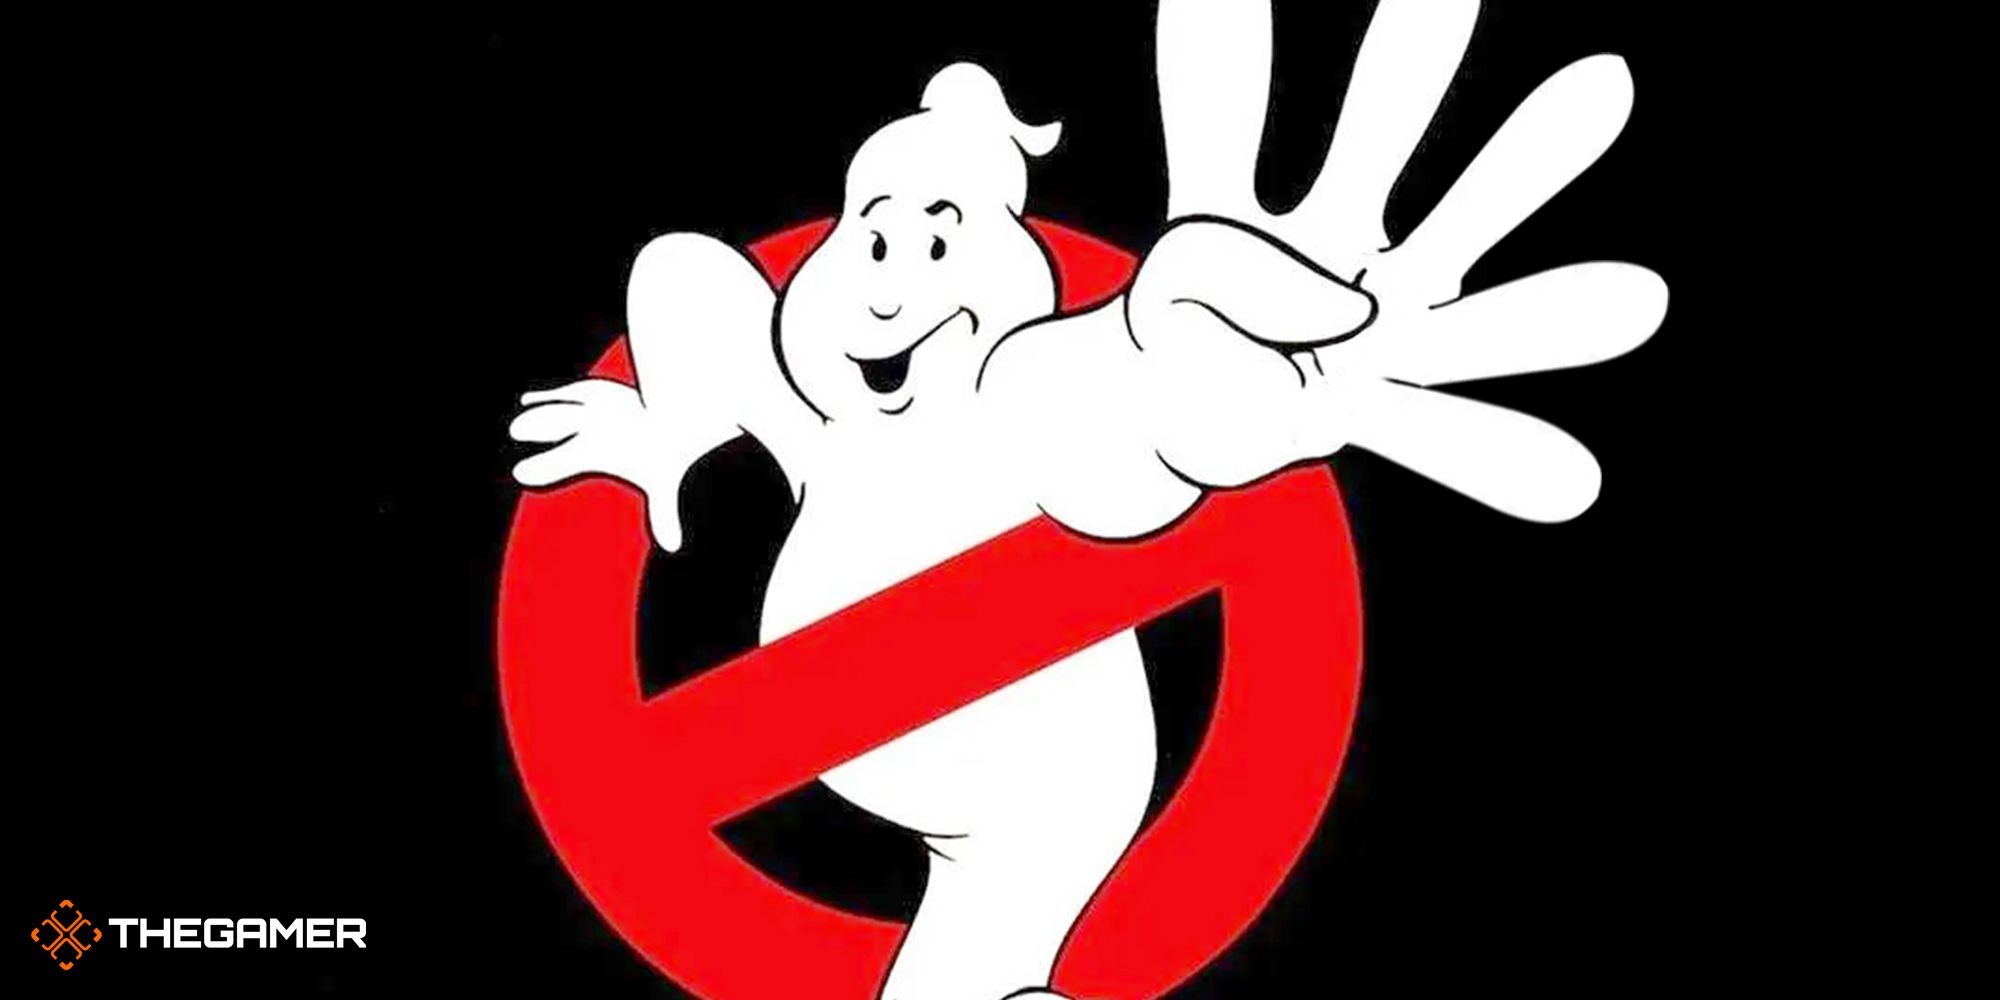 The Ghostbusters ghost with four fingers raised.